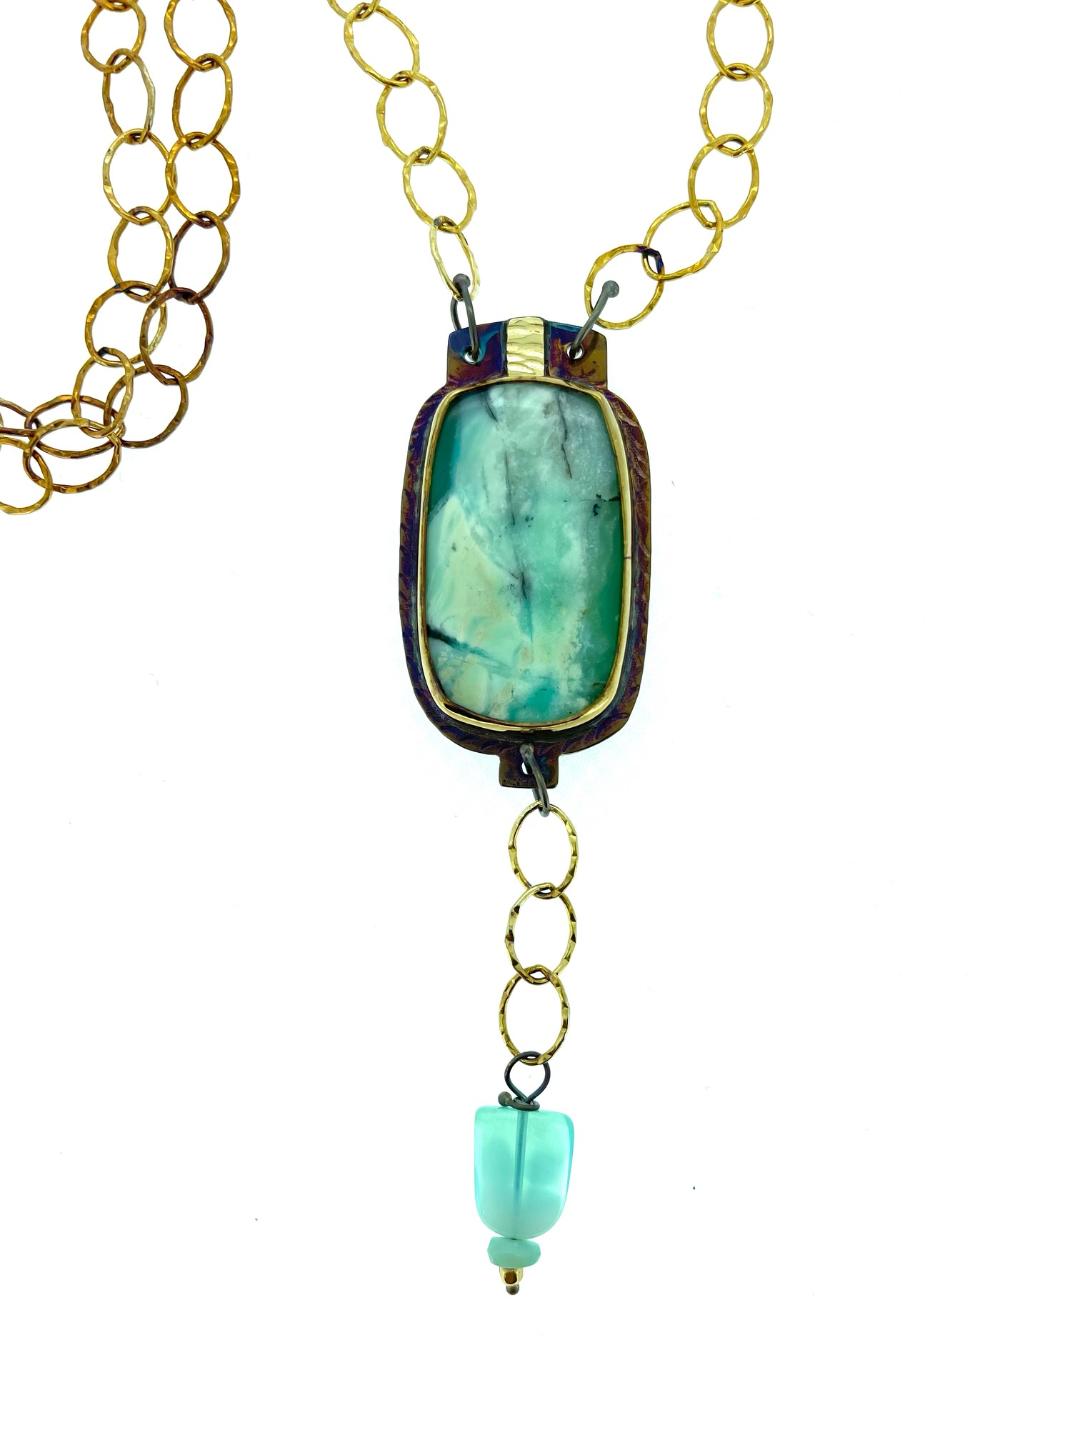 Blue Opal Petrified Wood Necklace in Sterling Silver and 18k Gold, 20